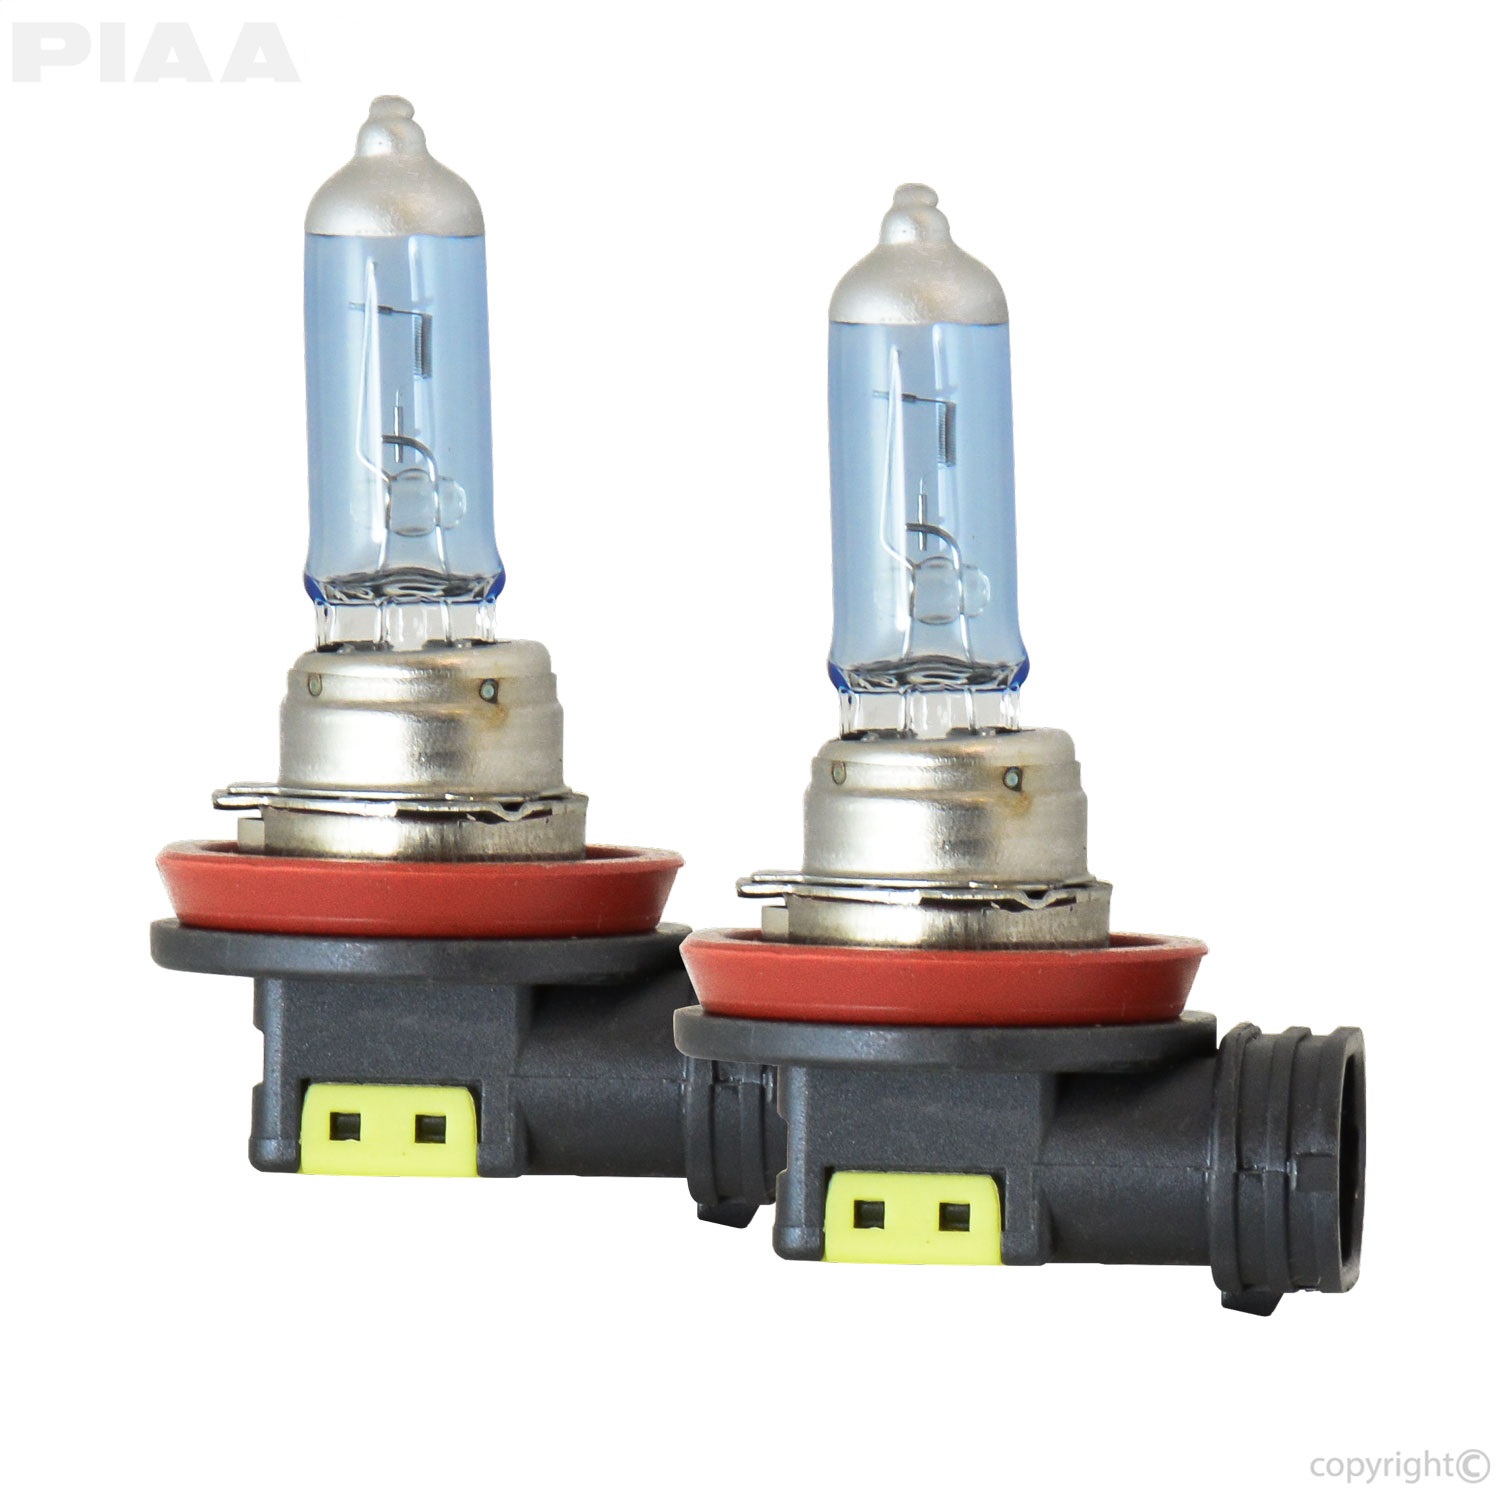 PIAA H11 XTreme White Hybrid Twin Pack Halogen Bulbs - 23-10111 - image 1 of 2